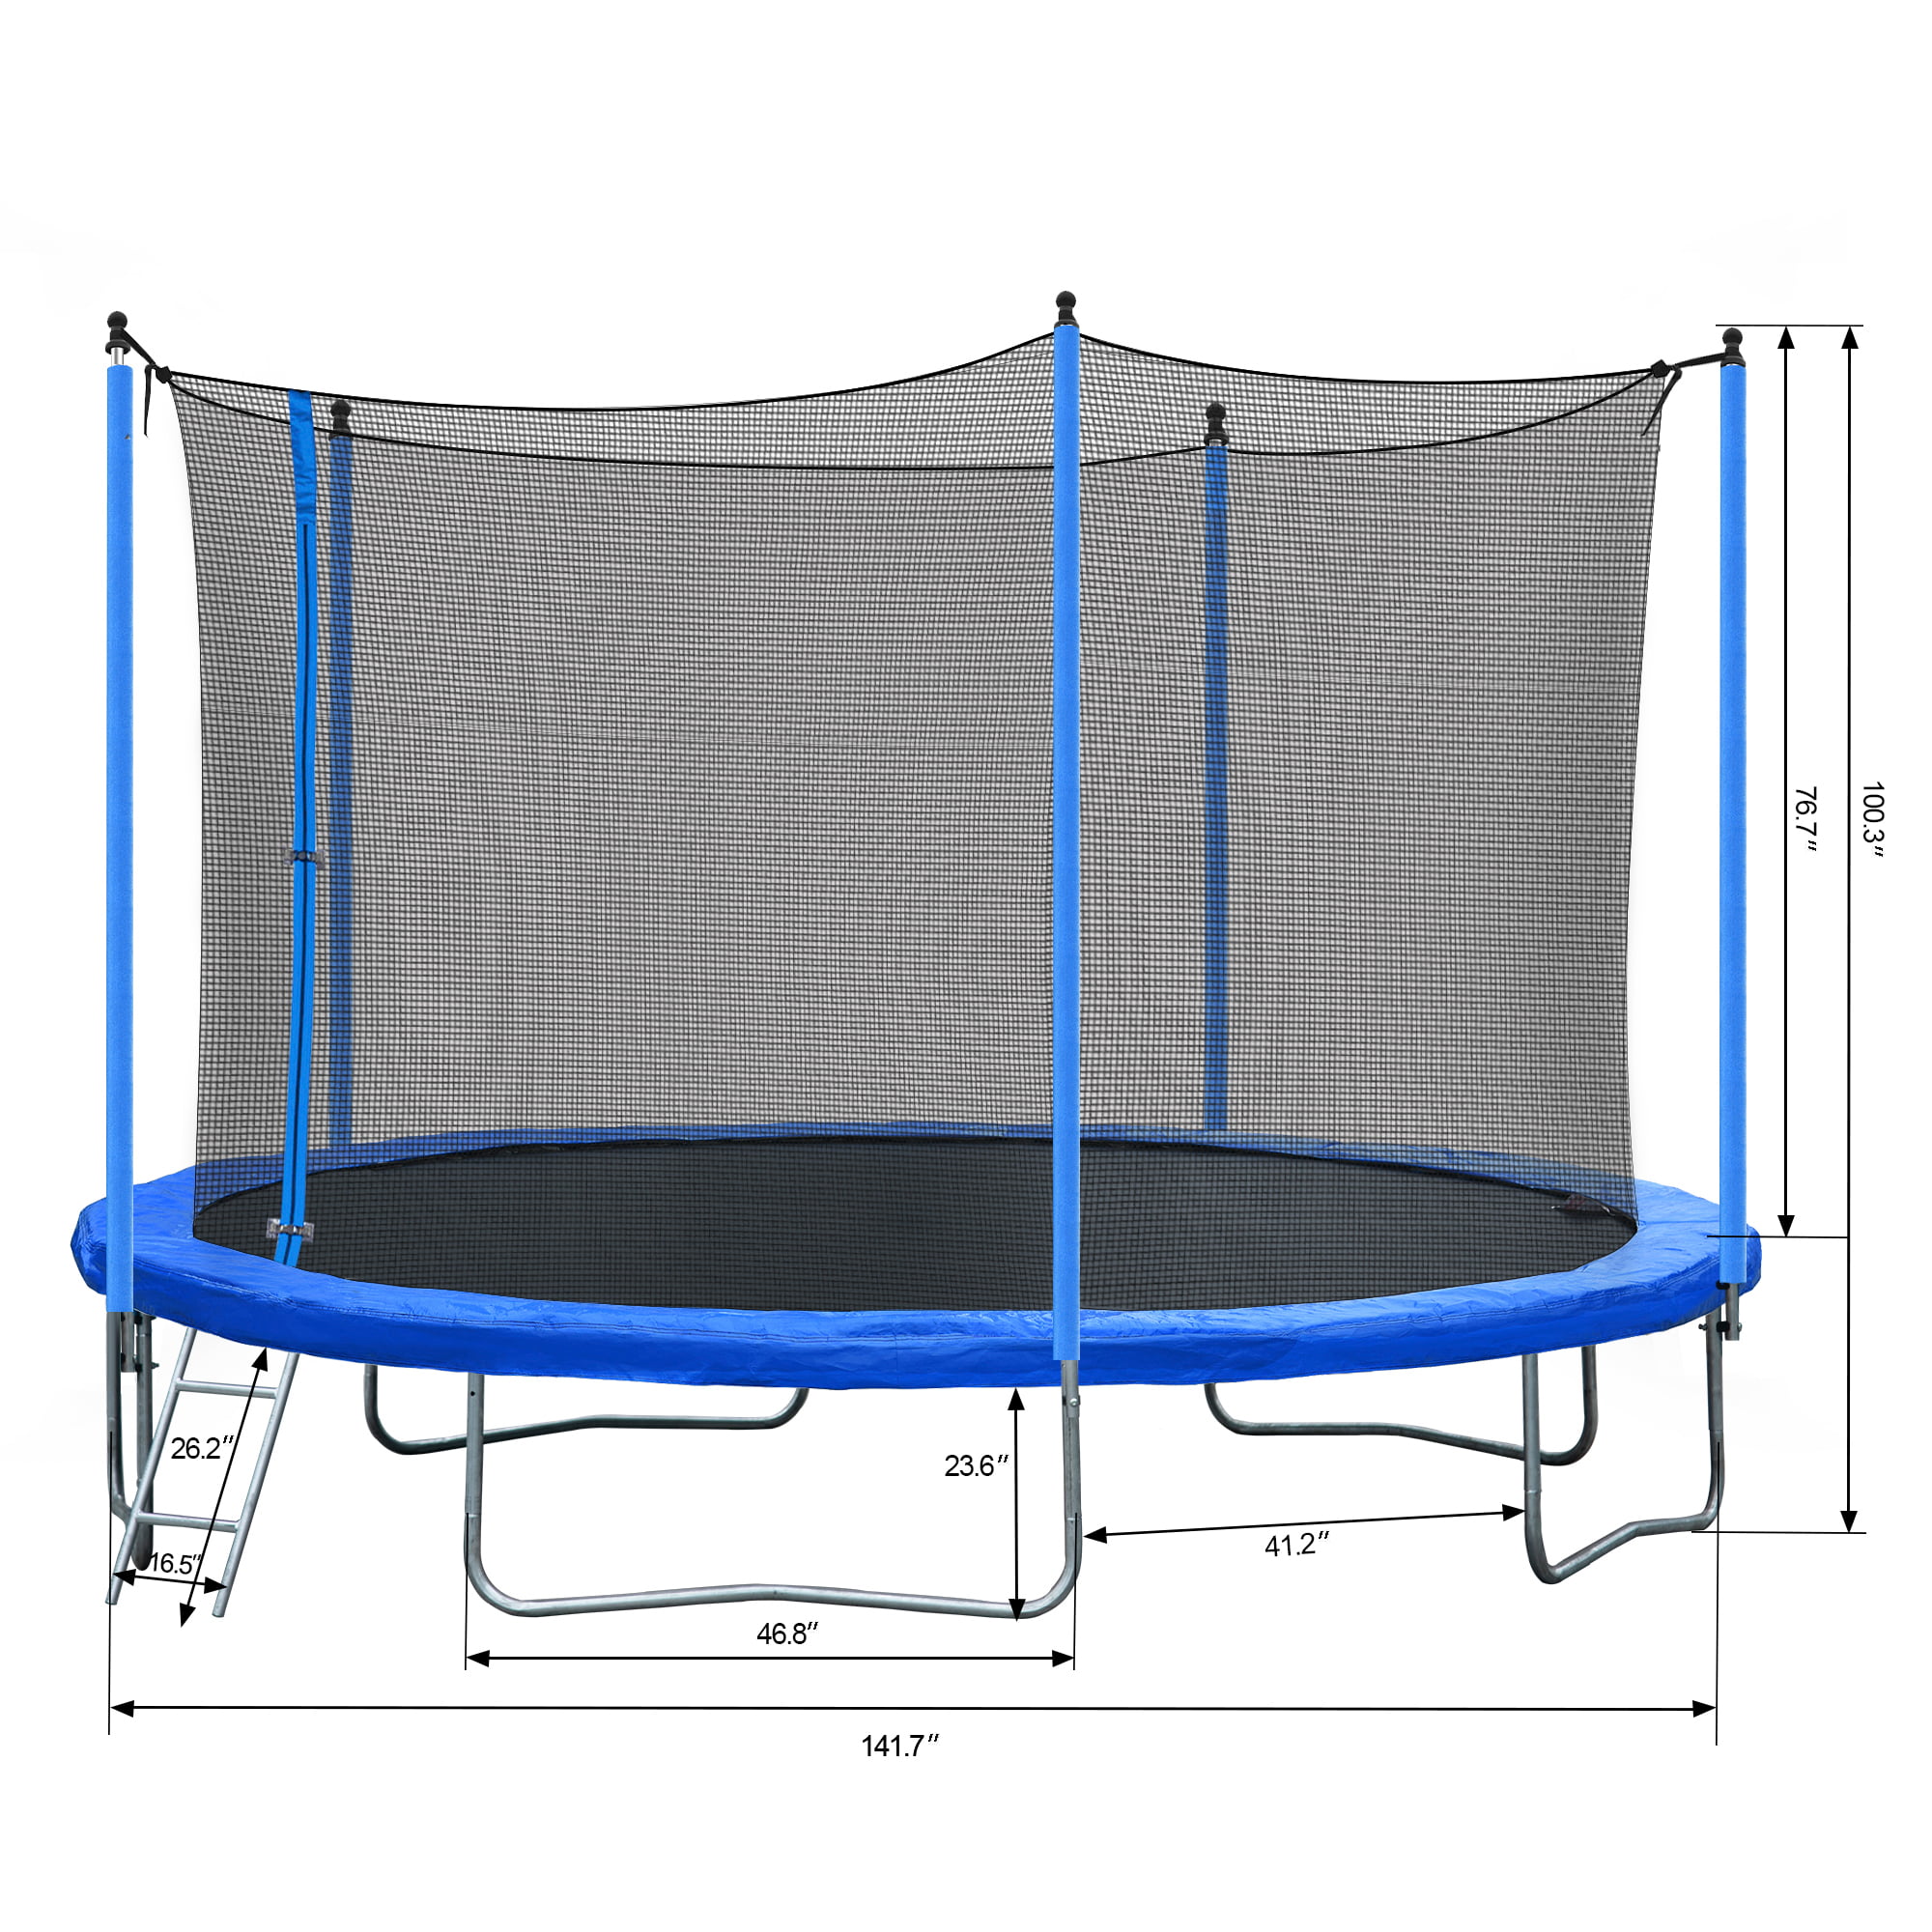 Euroco 12FT Trampoline for Kids, Solid Trampoline with Enclosure and Ladder for Adults and 4-5 Kids, Outdoor Recreation Trampoline, High Duty Safety - image 3 of 10